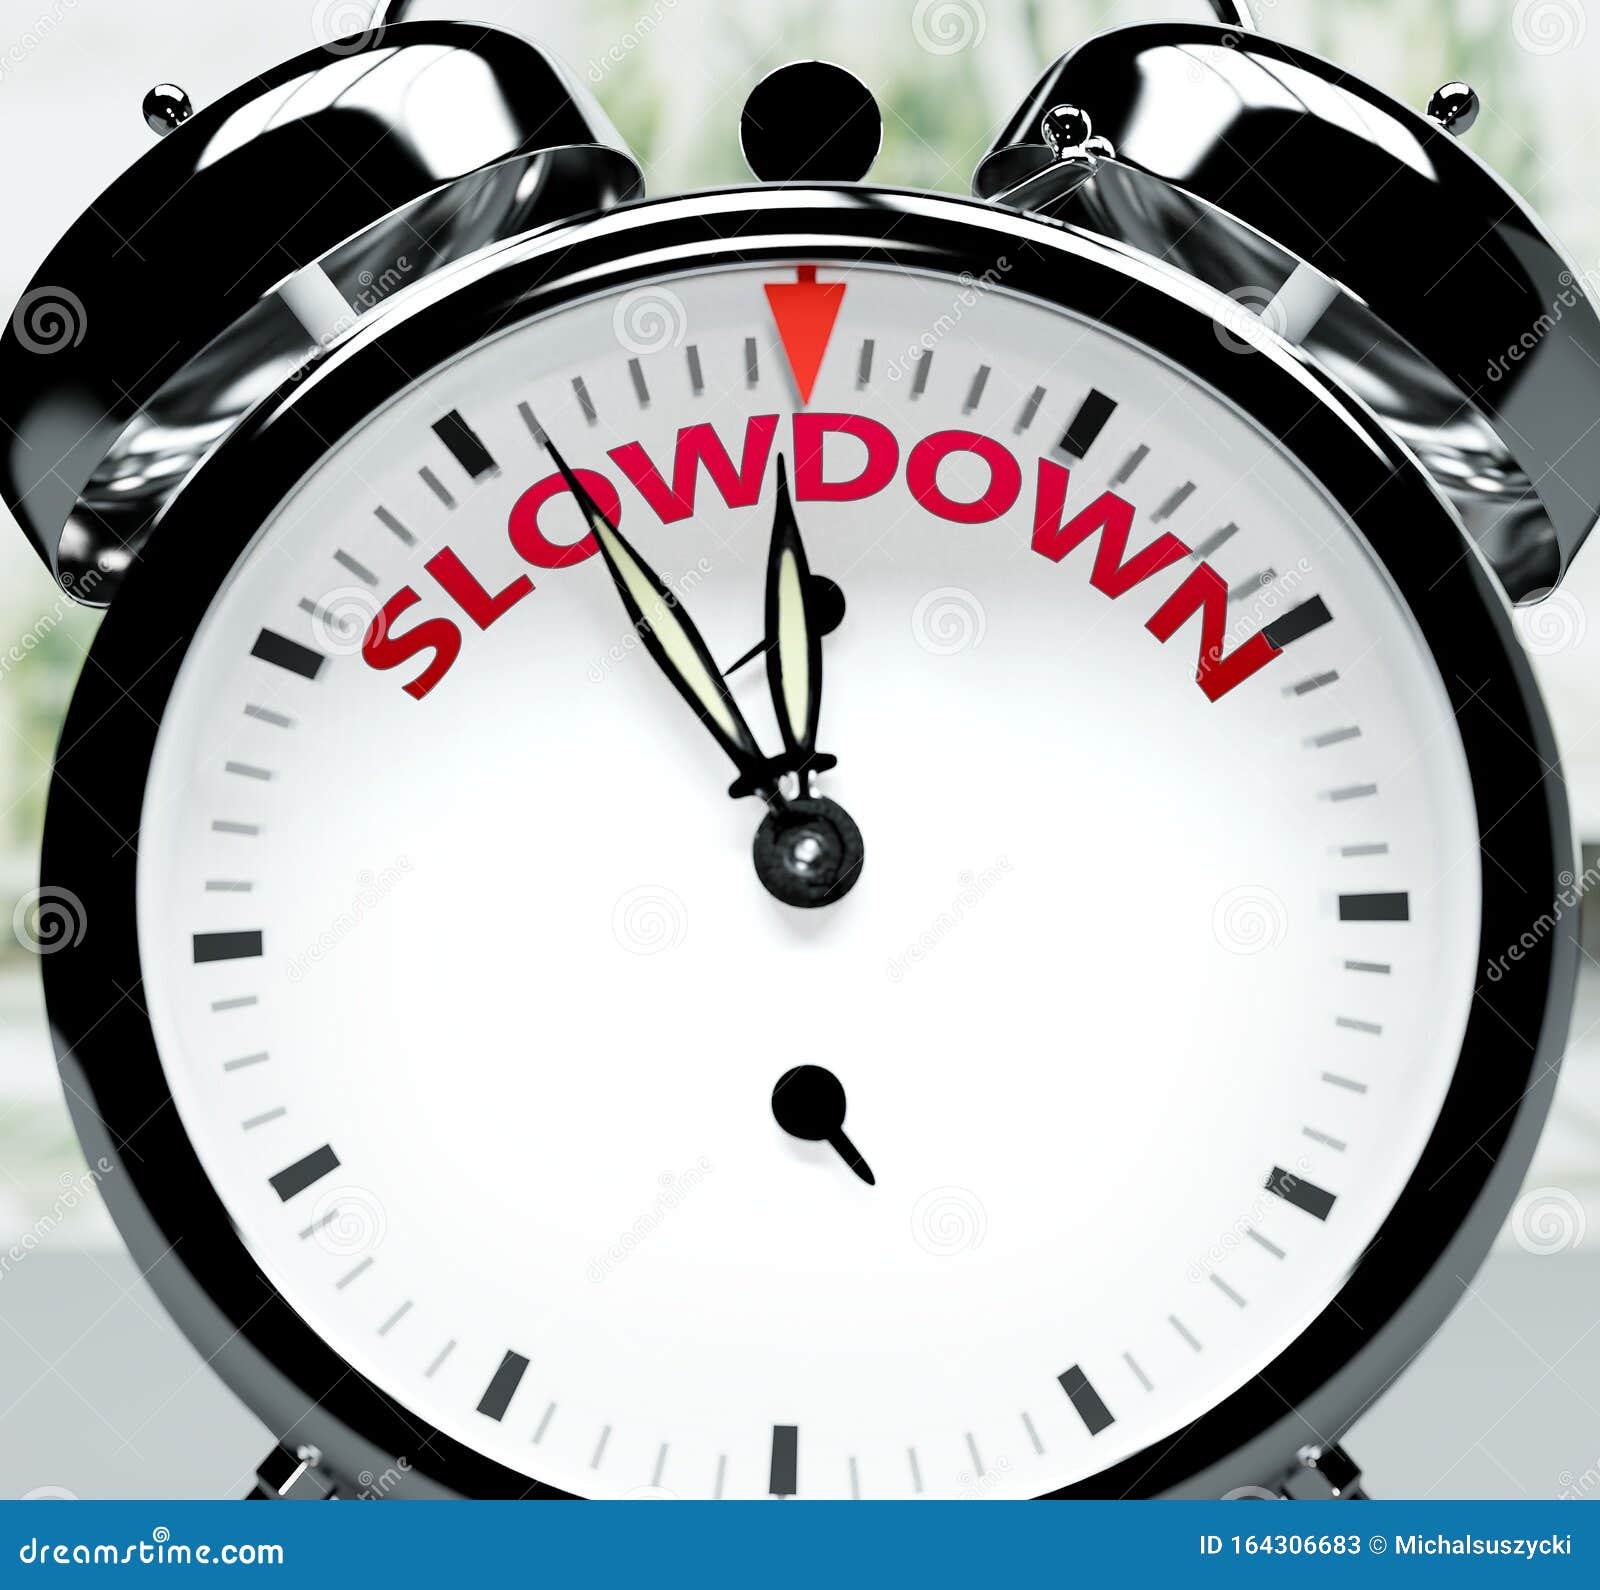 slowdown soon, almost there, in short time - a clock izes a reminder that slowdown is near, will happen and finish quickly